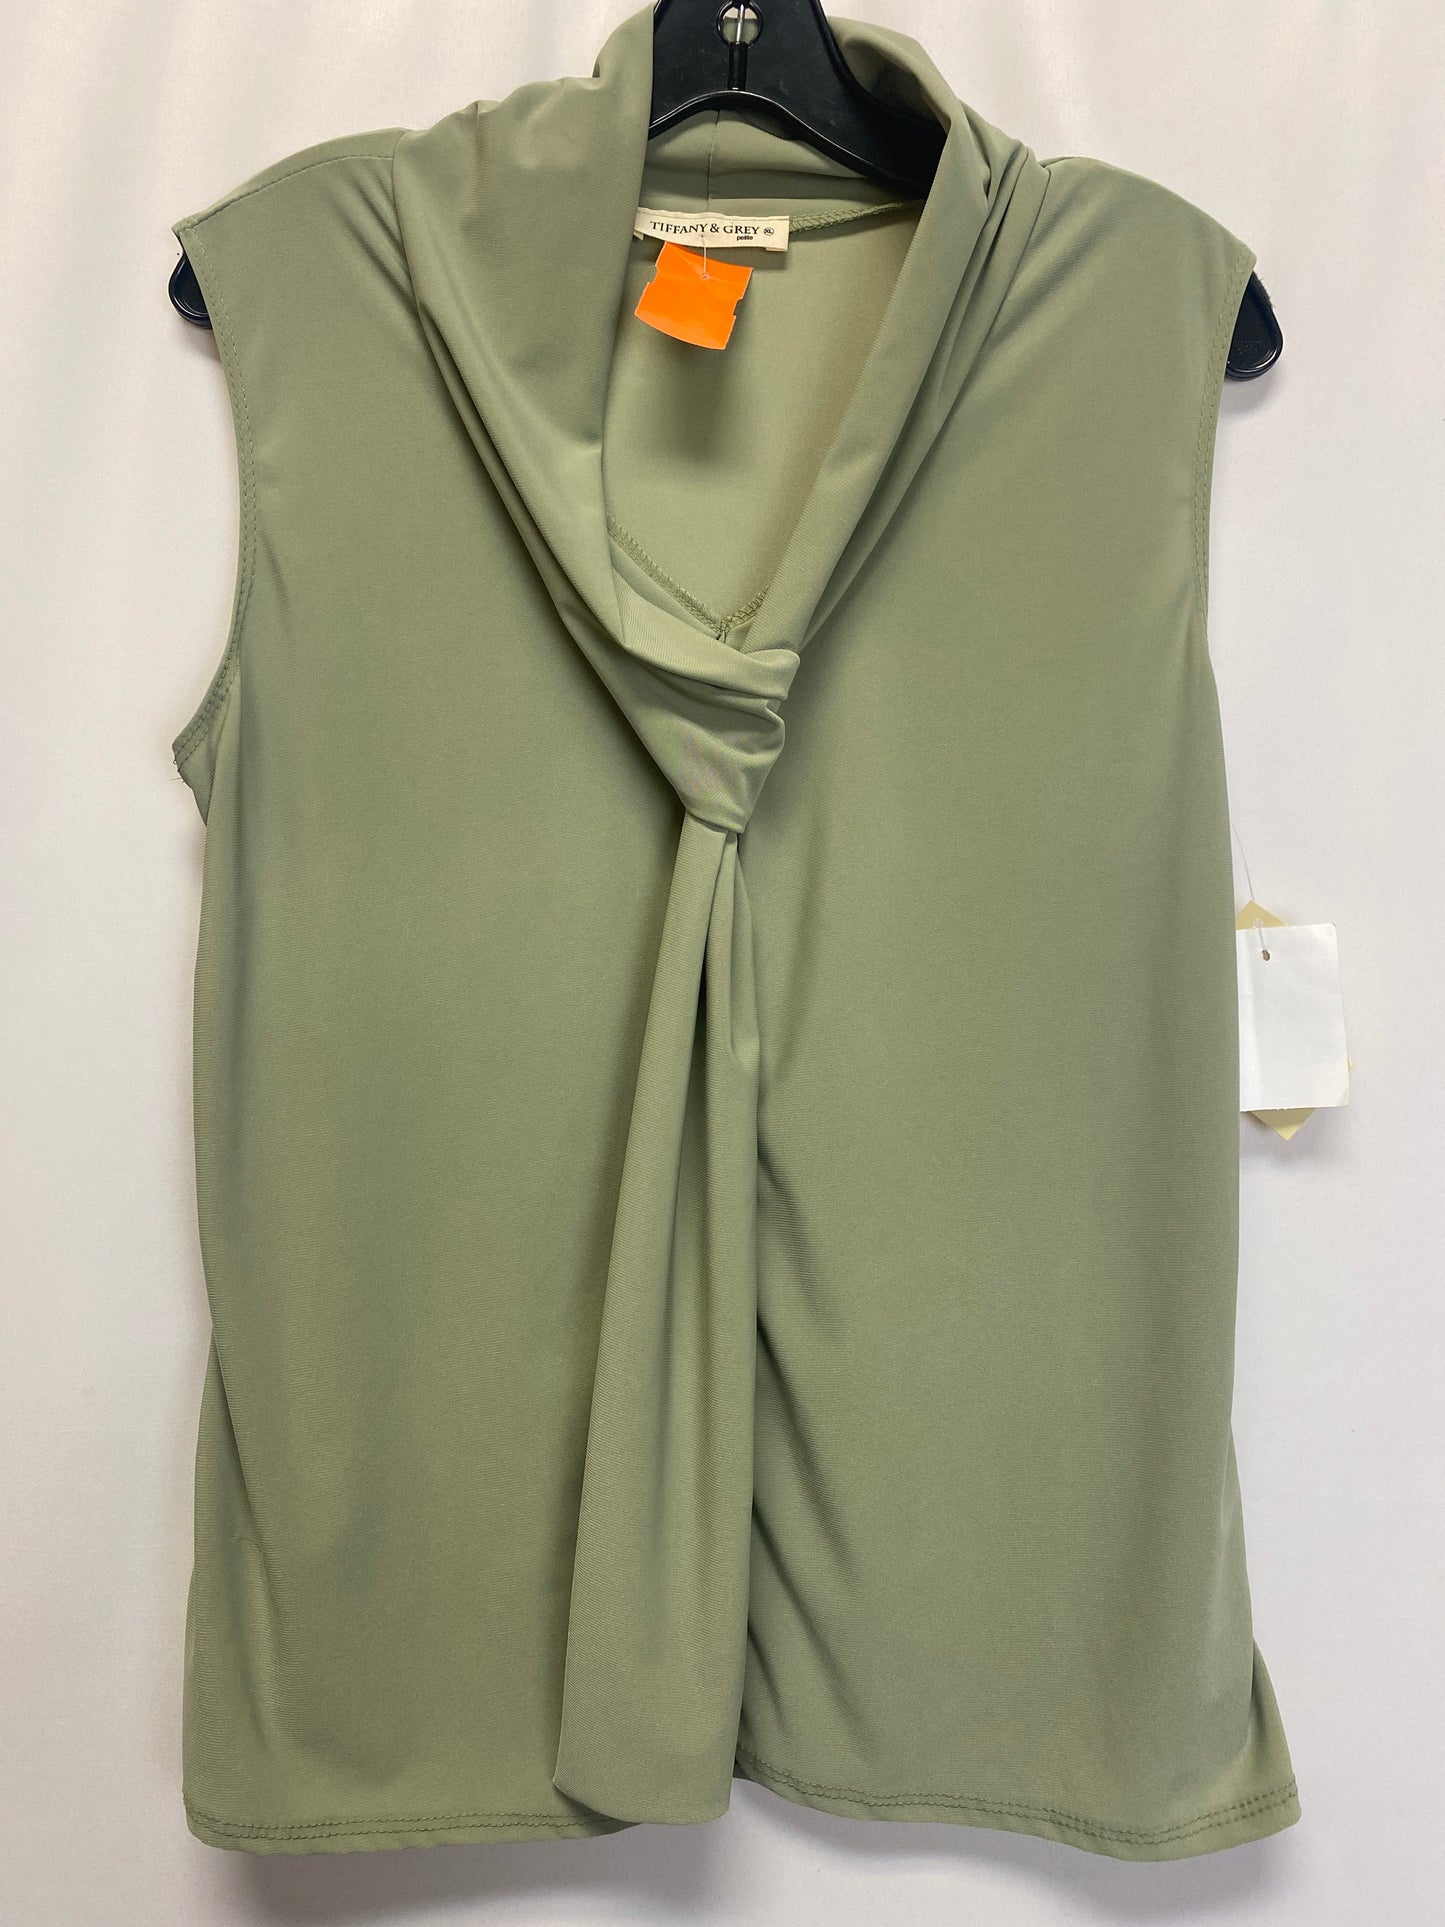 Top Sleeveless By Clothes Mentor  Size: Petite   Xl